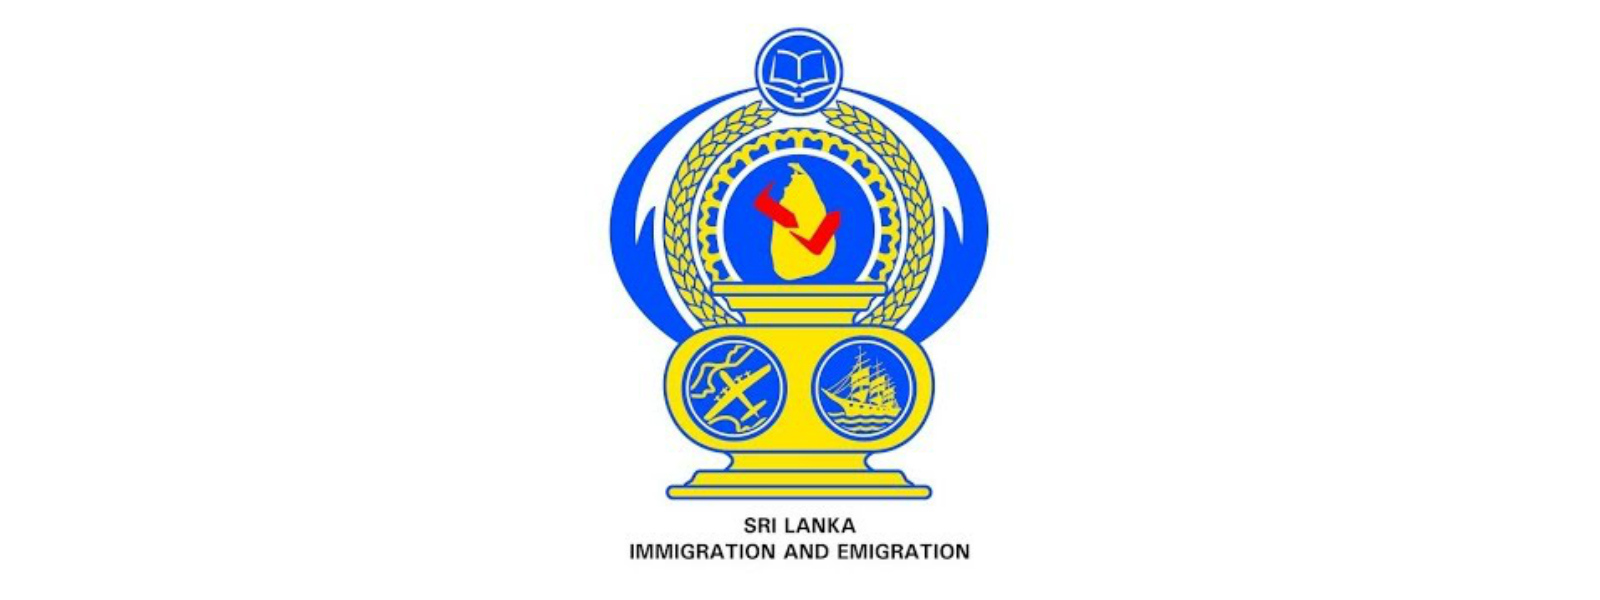 Public barred from visiting immigration department until October 9